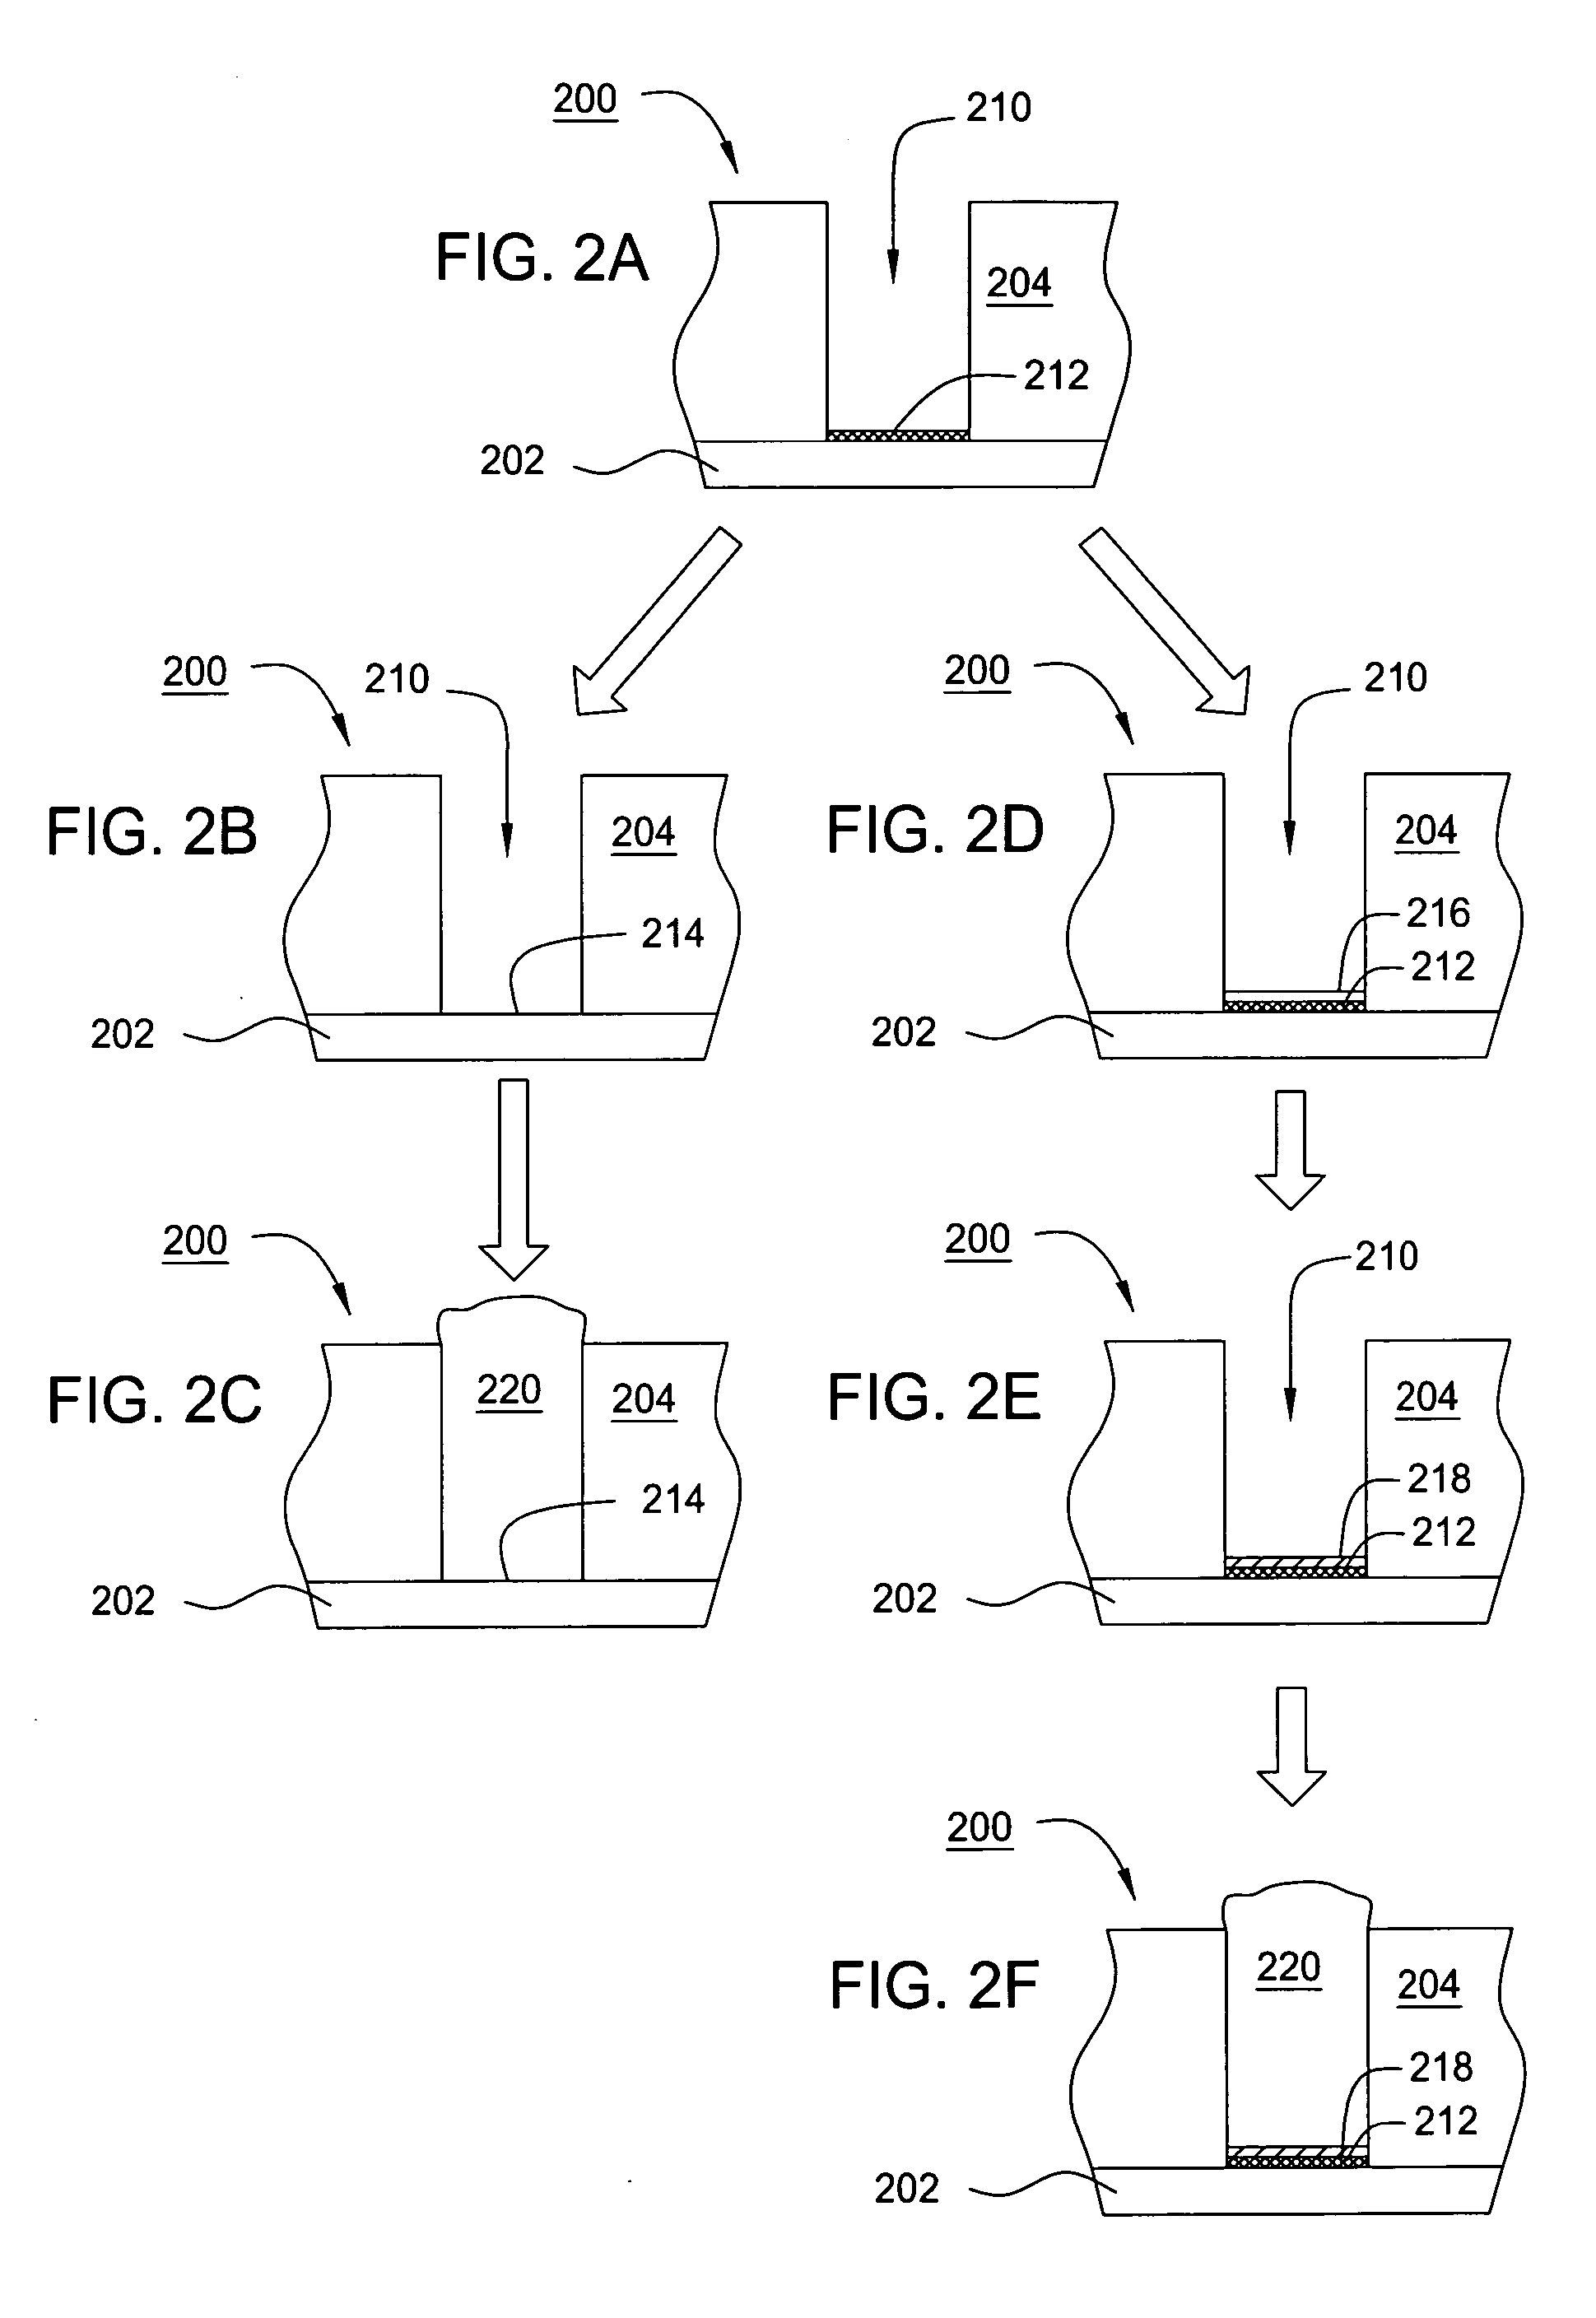 Electroless deposition process on a silicon contact